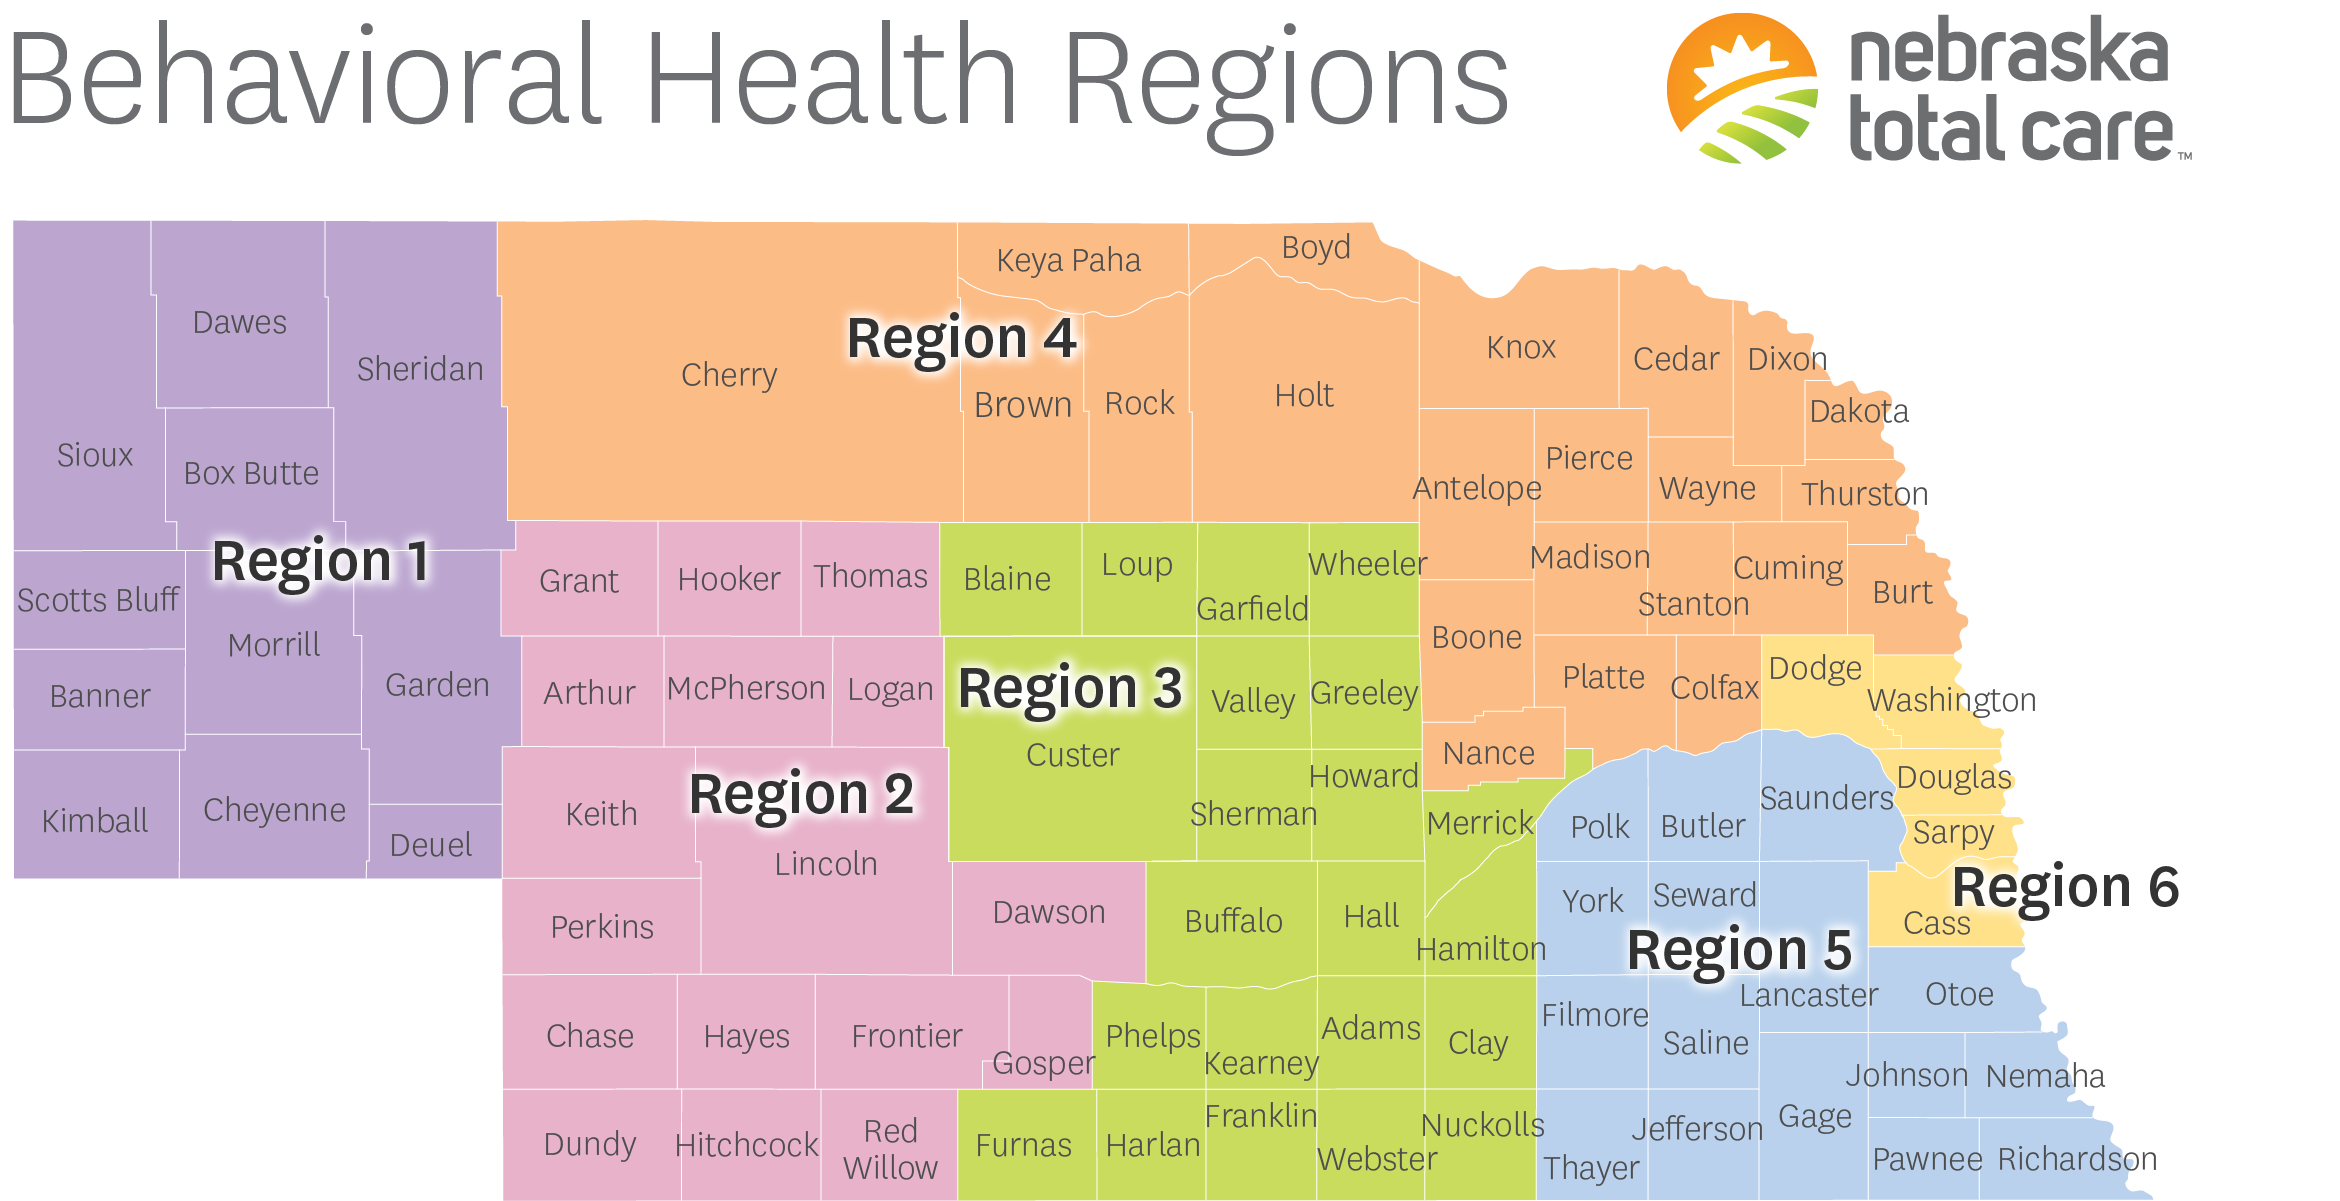 Territory Map. Behavioral Health Provider Relations Reps. For assistance, contact 1-844-385-2192, Relay 711.